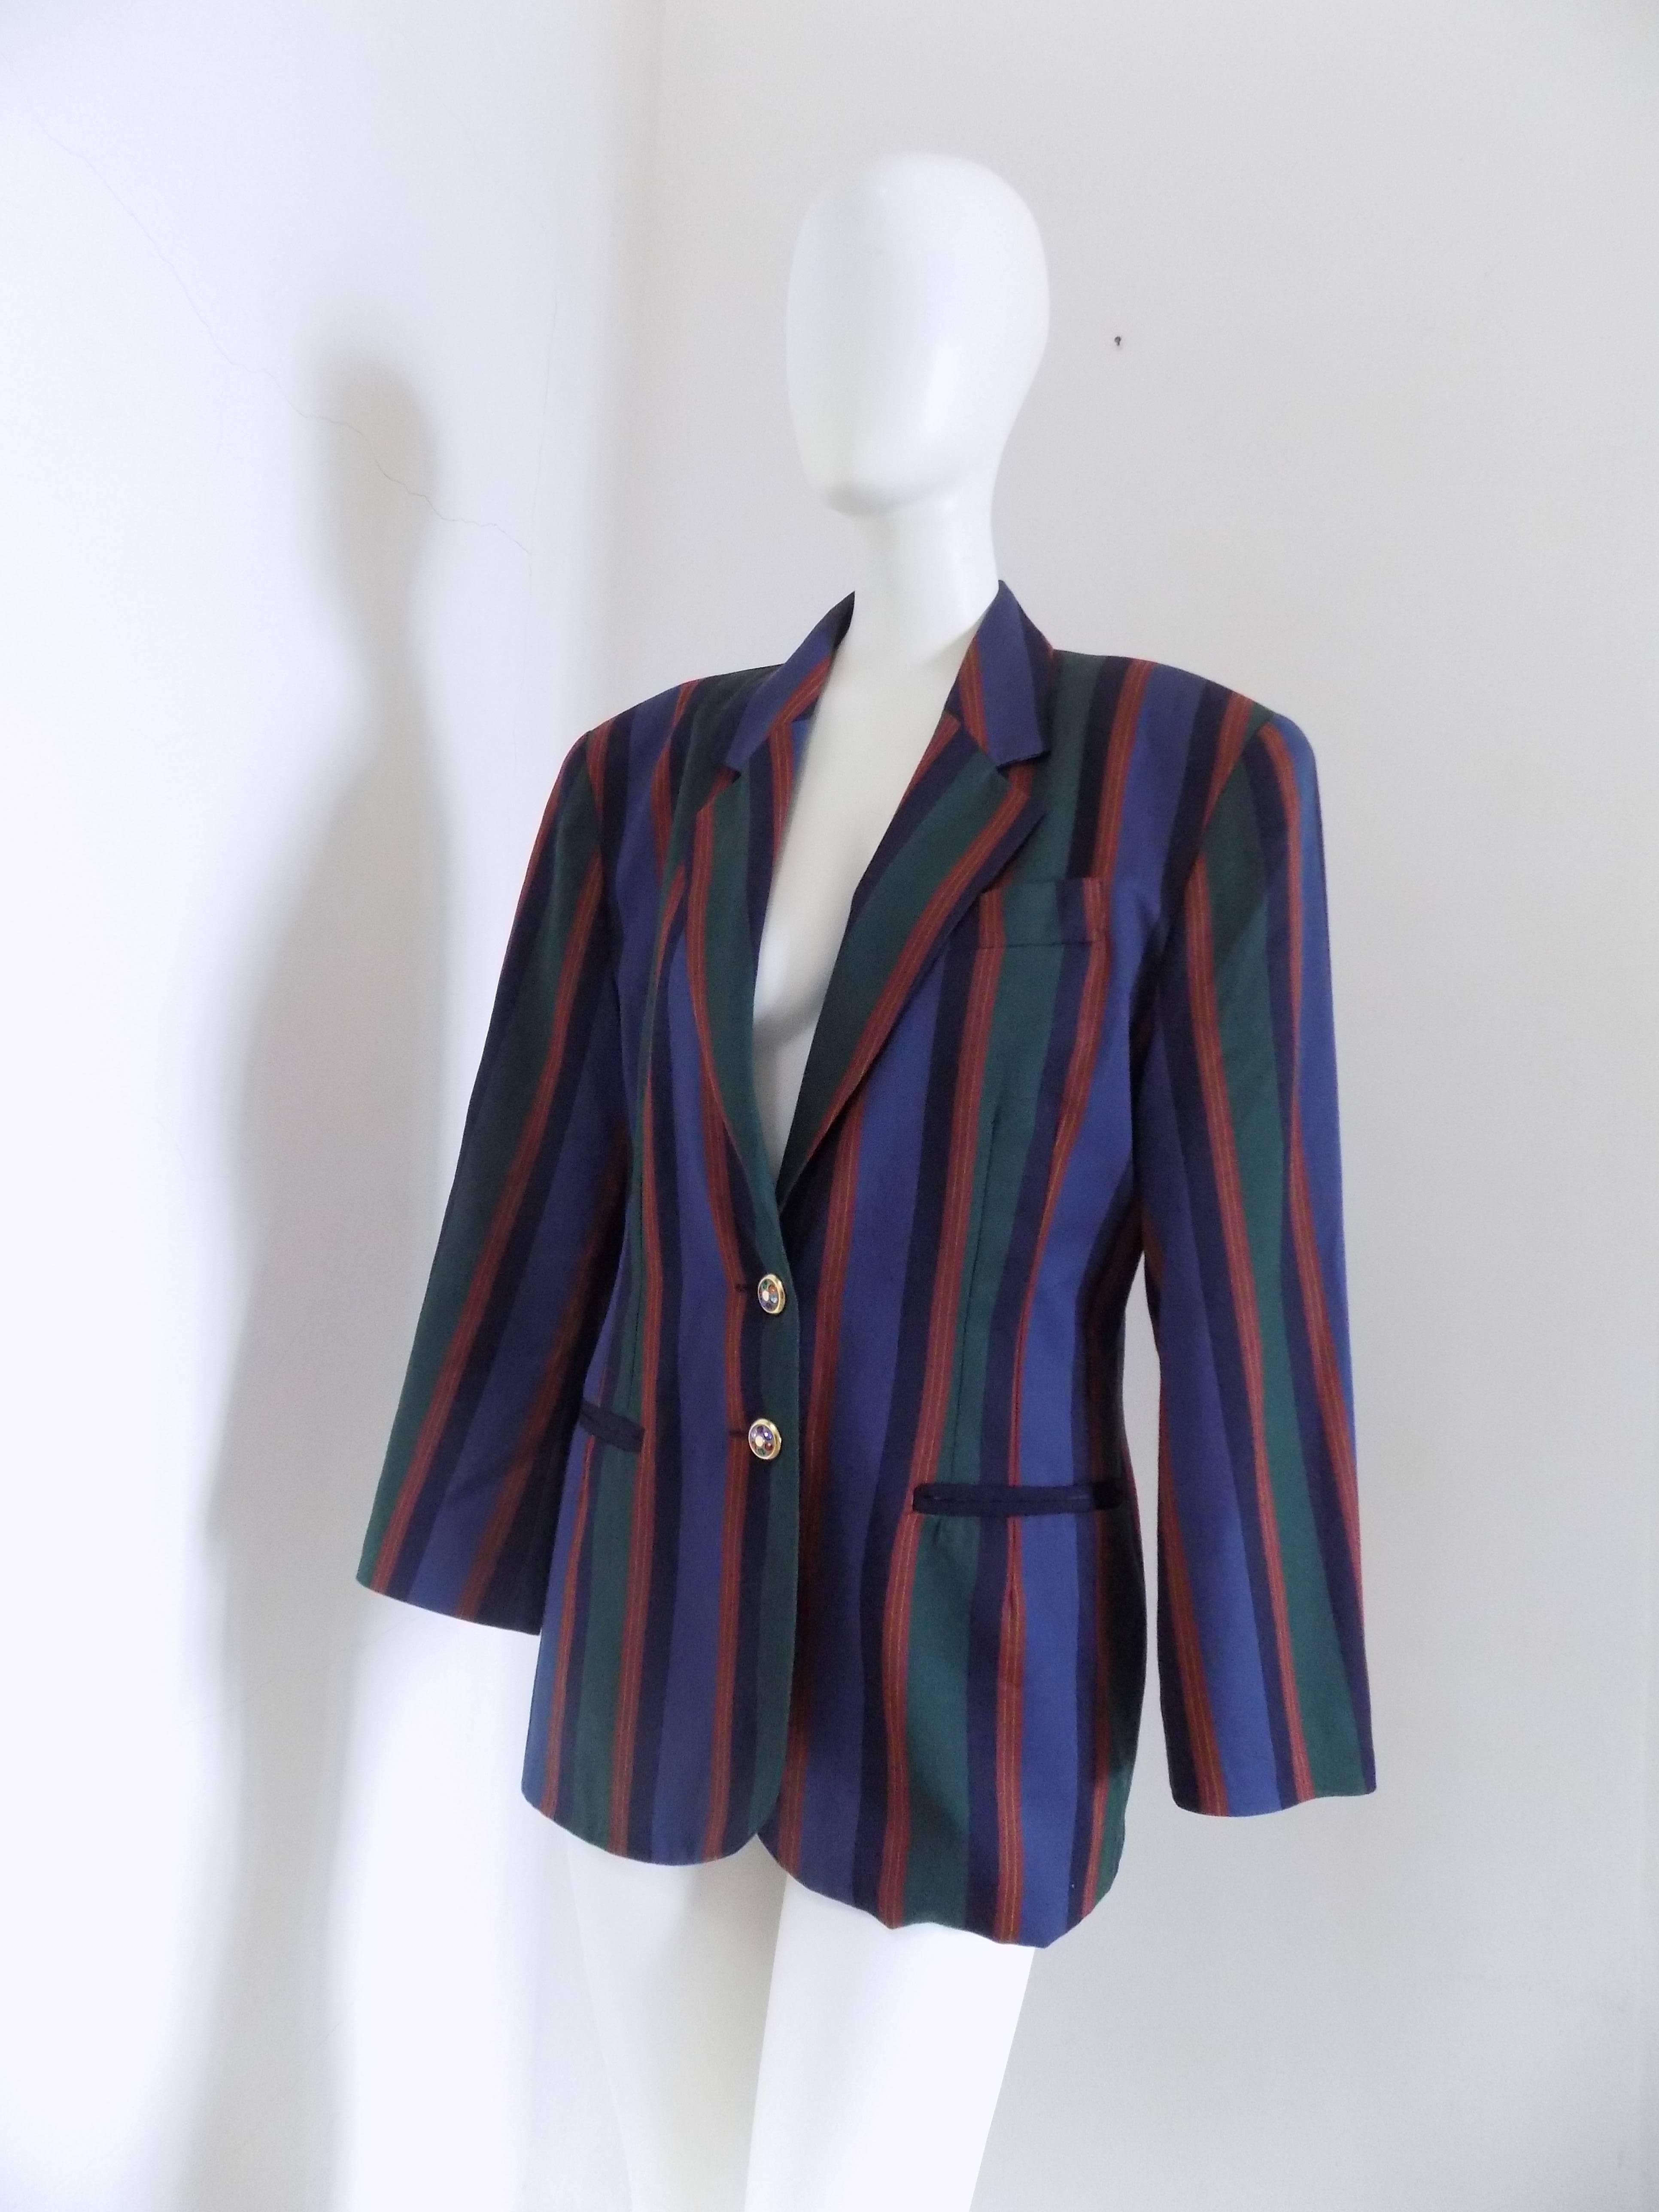 1970s Debeaux Multicolour Jacket 
Embellished botton
Totally made in italy in italian size range 44